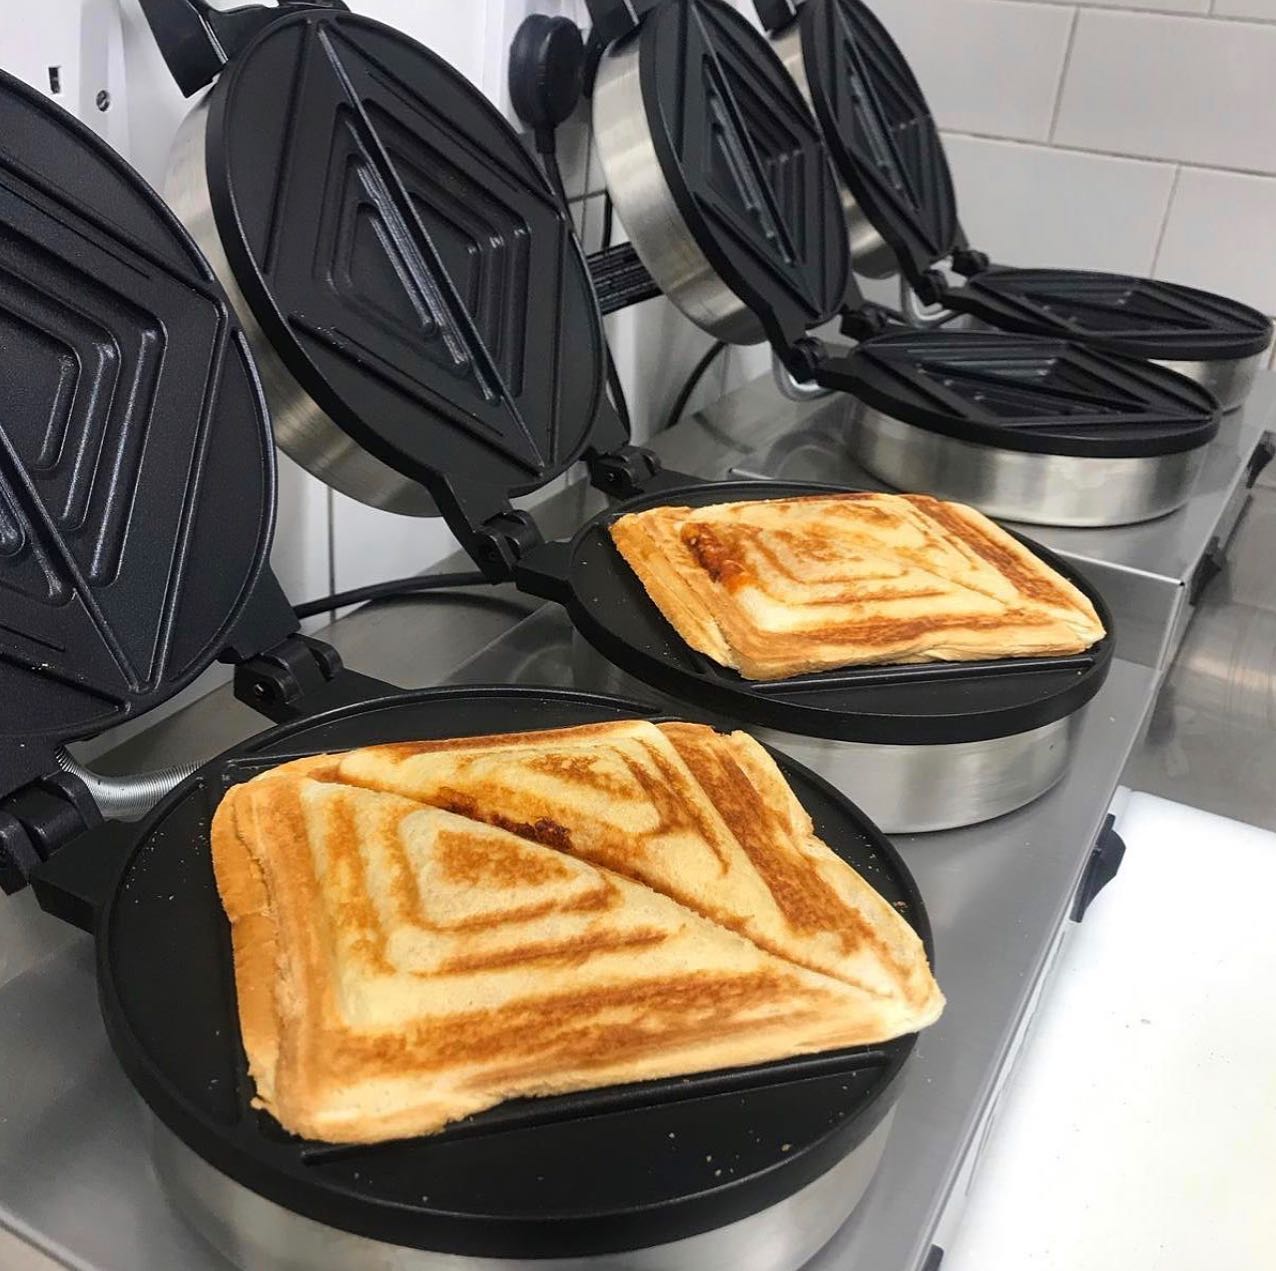 A retro Breville toastie stall is opening inside the Arndale Market, The Manc